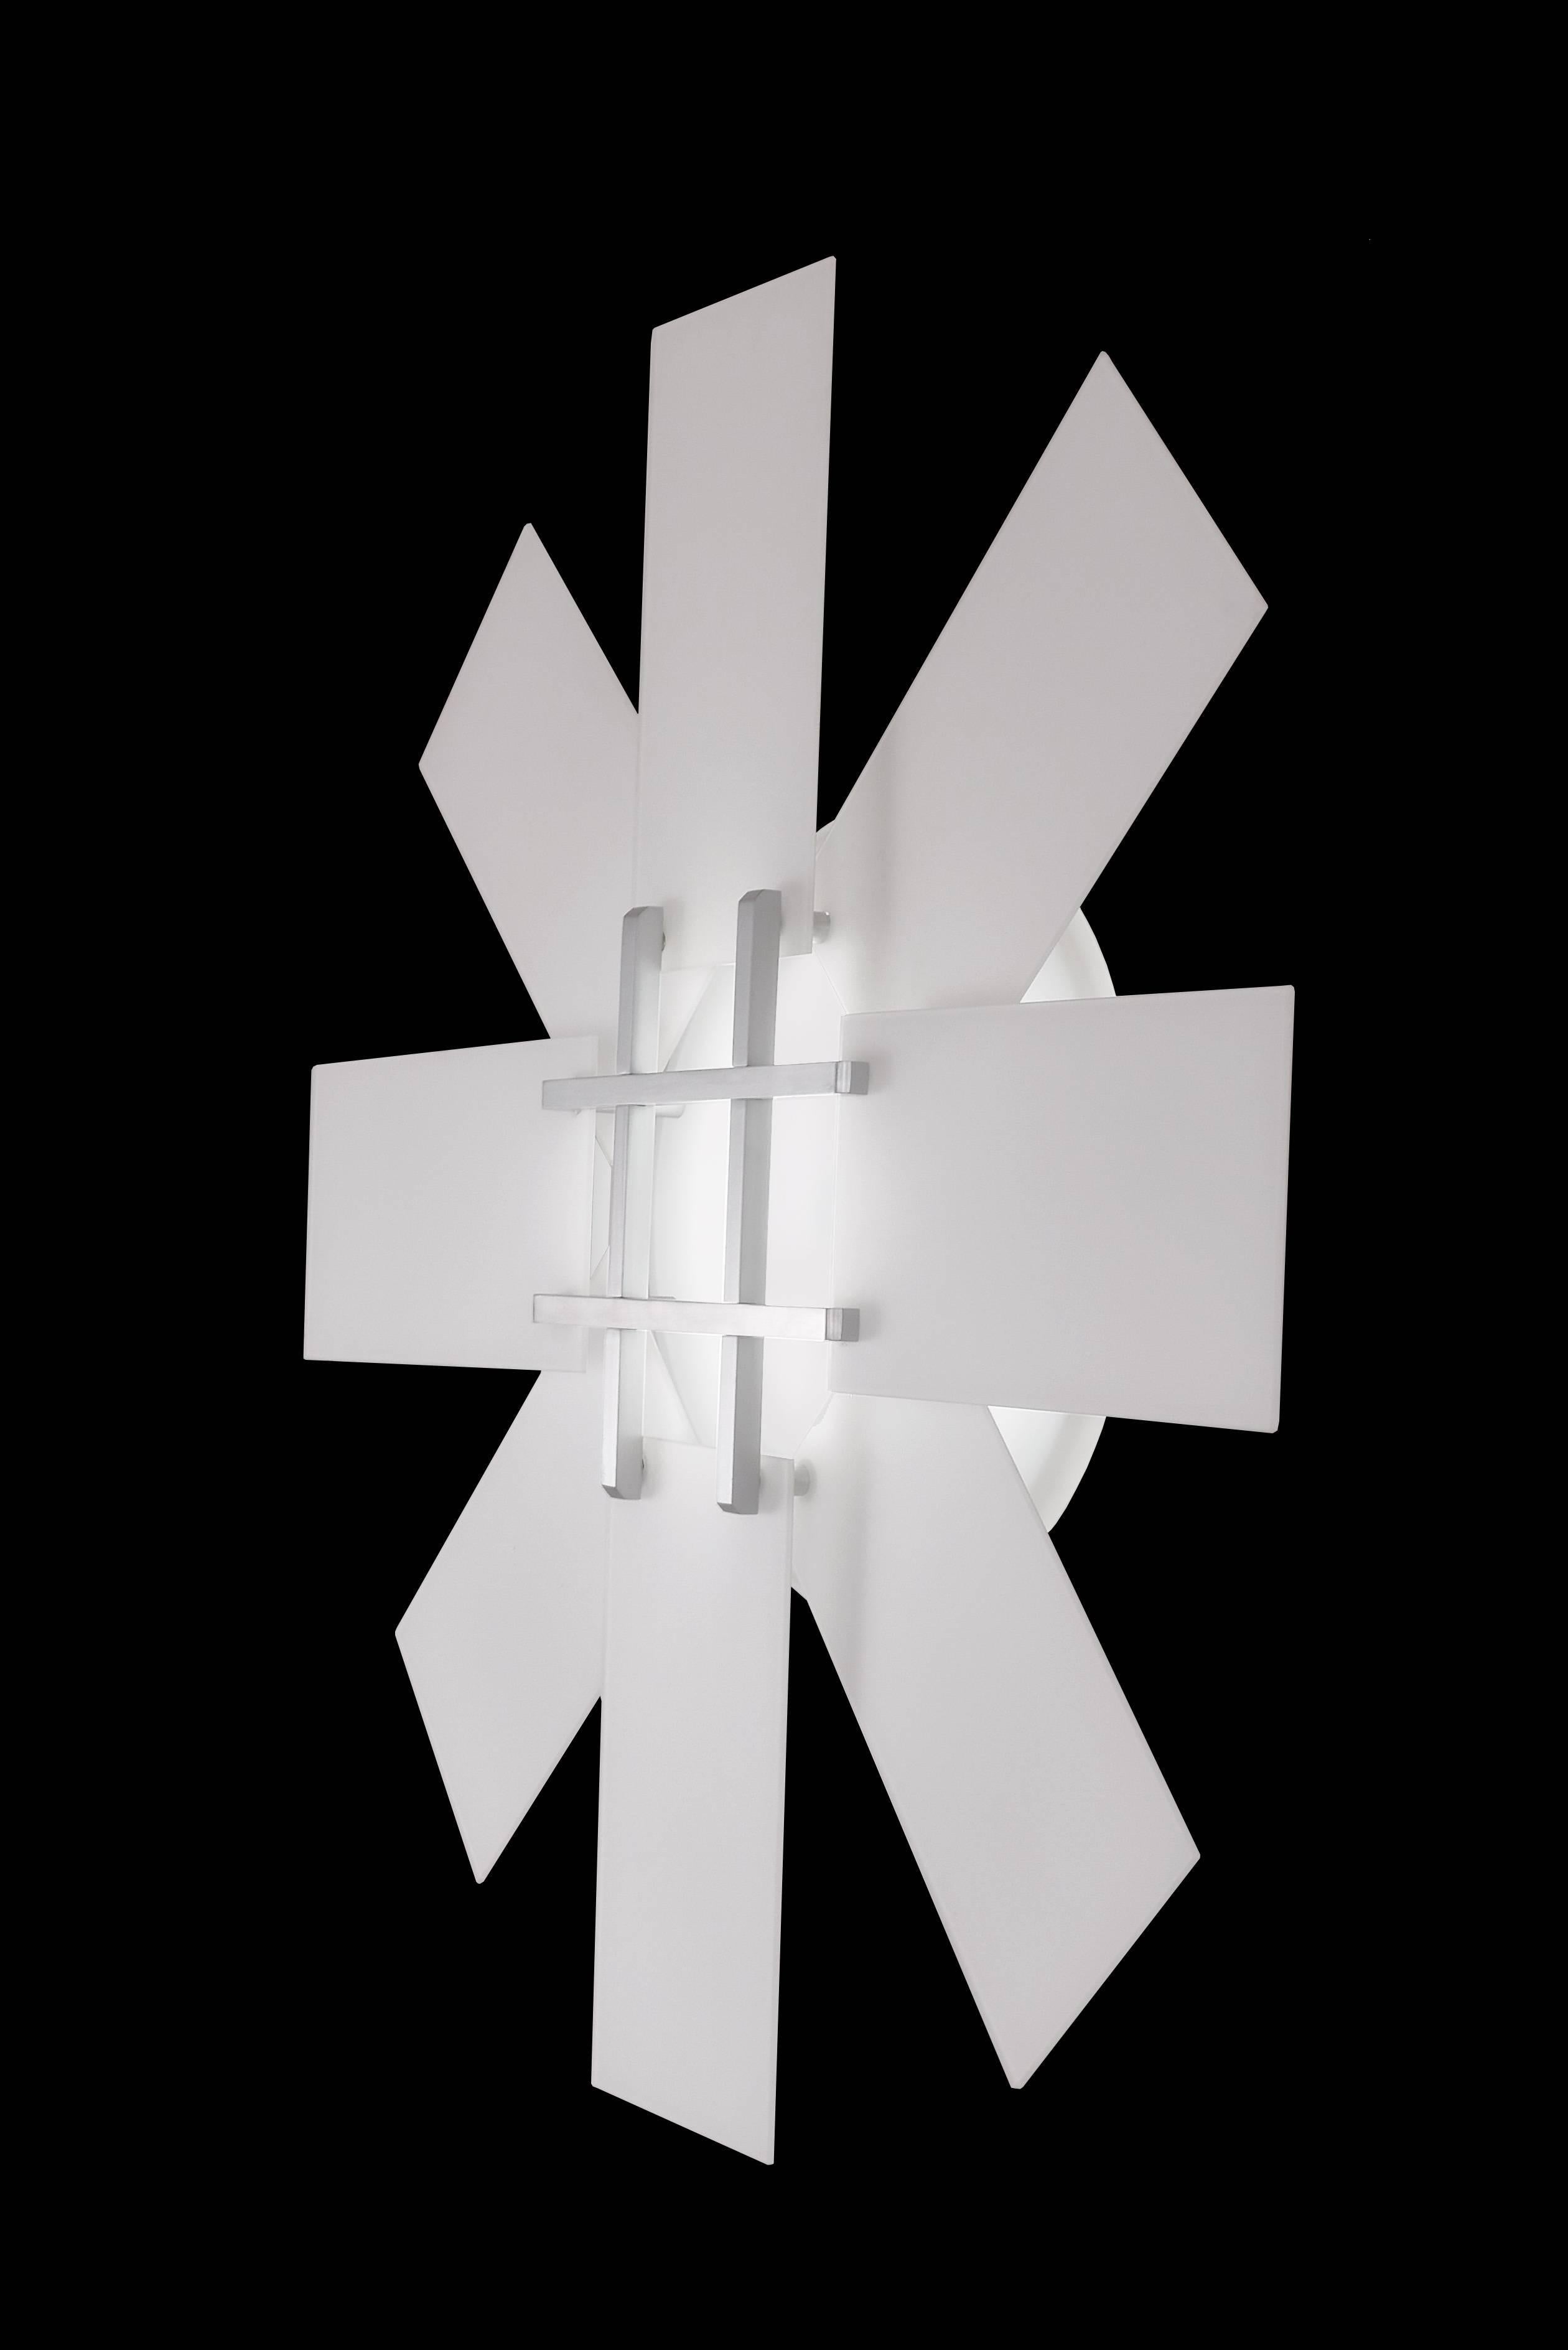 Sunflower wall sculpture consists of overlapping white glass panels, machined aluminum with LED lamping. The overlapping panels give a sense of depth with only a projection of 4 inches.
Can be used in multiples on the wall or ceiling. Can be used in